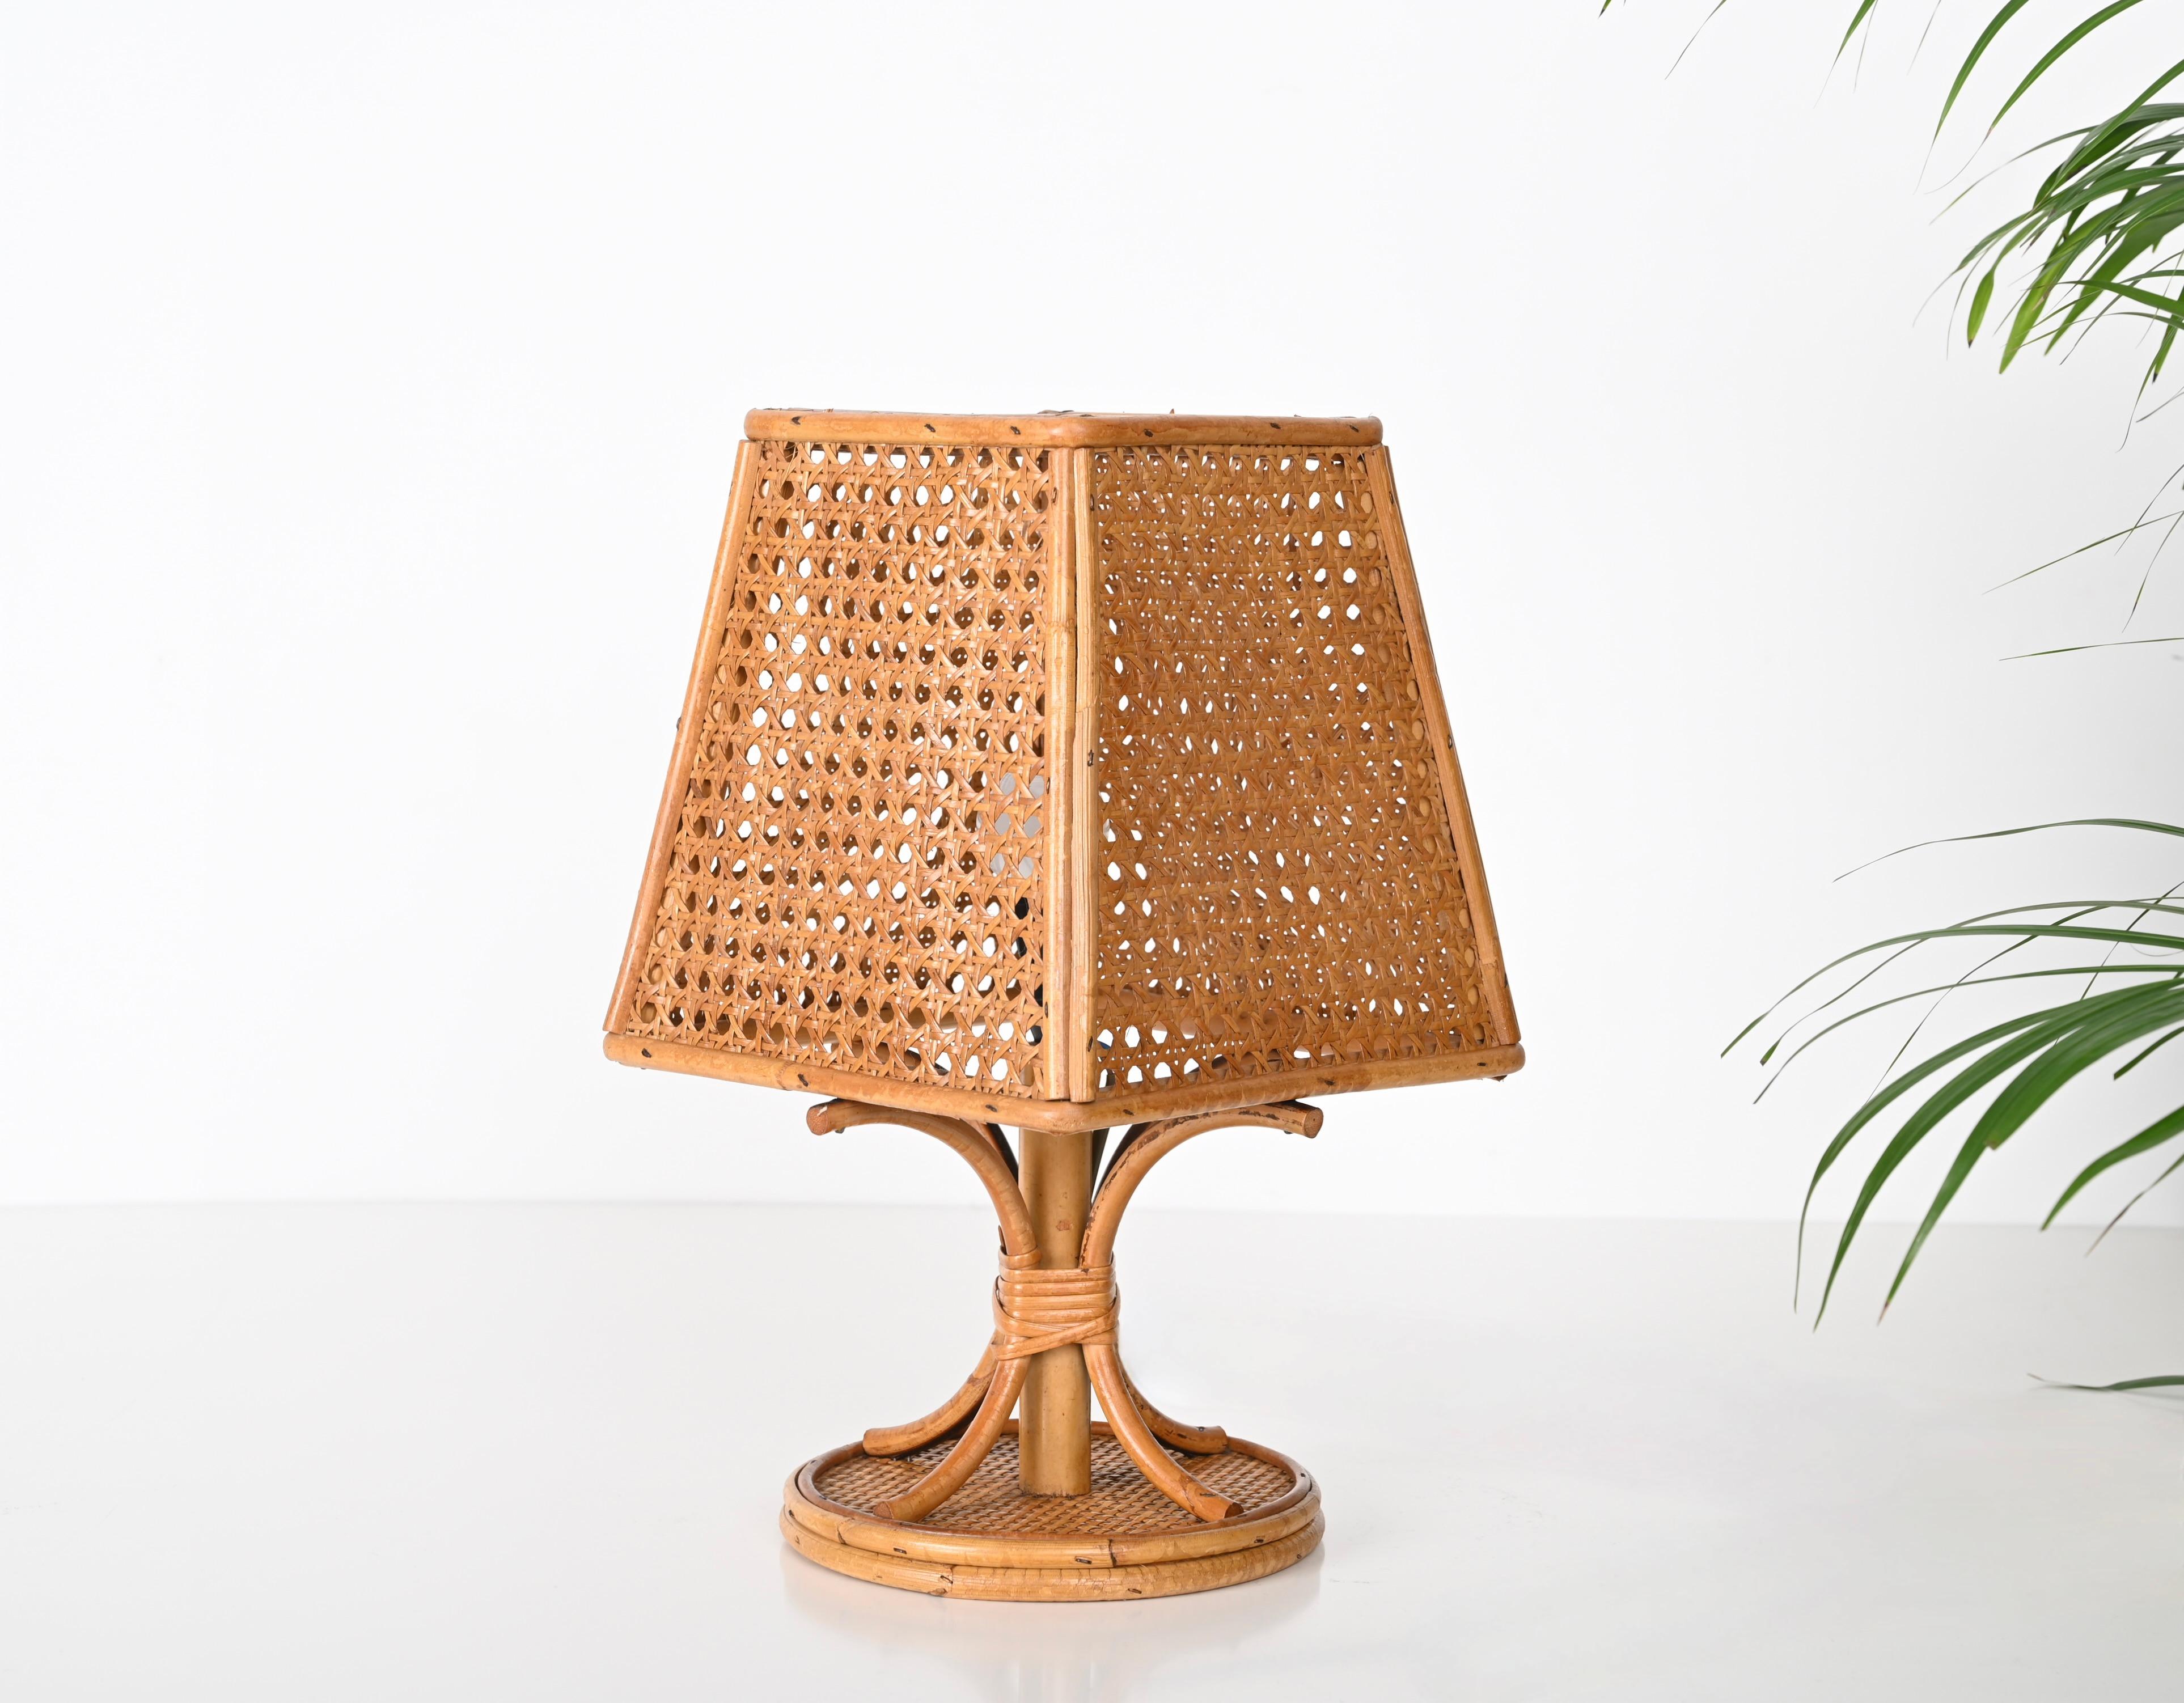 20th Century Pair of Midcentury Italian Table Lamps in Wicker and Rattan, 1960s